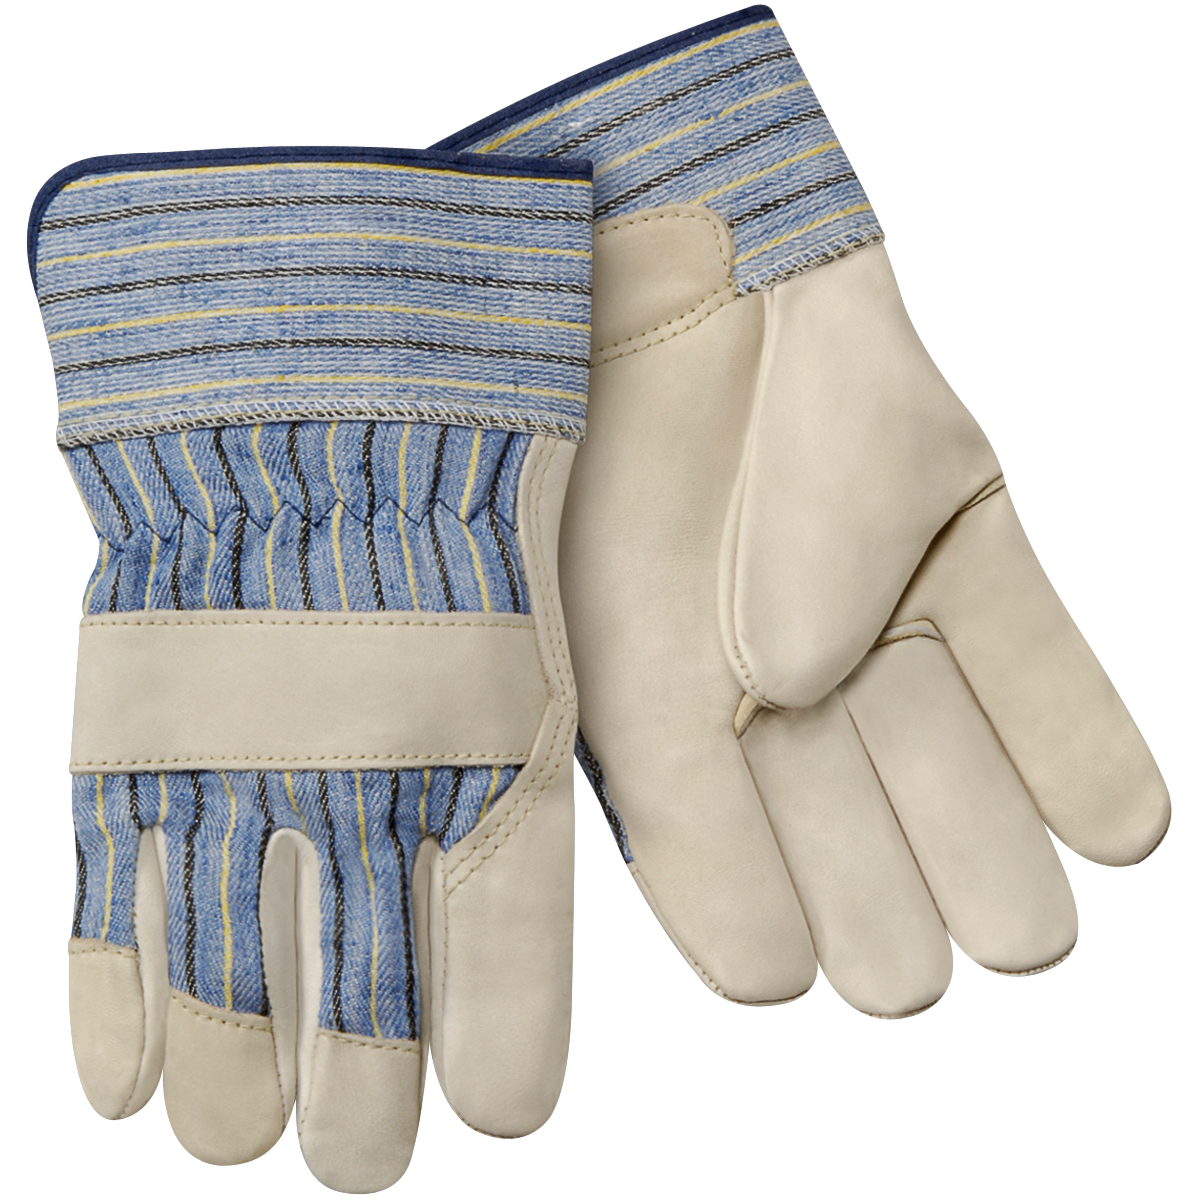 Work Gloves Free PNG